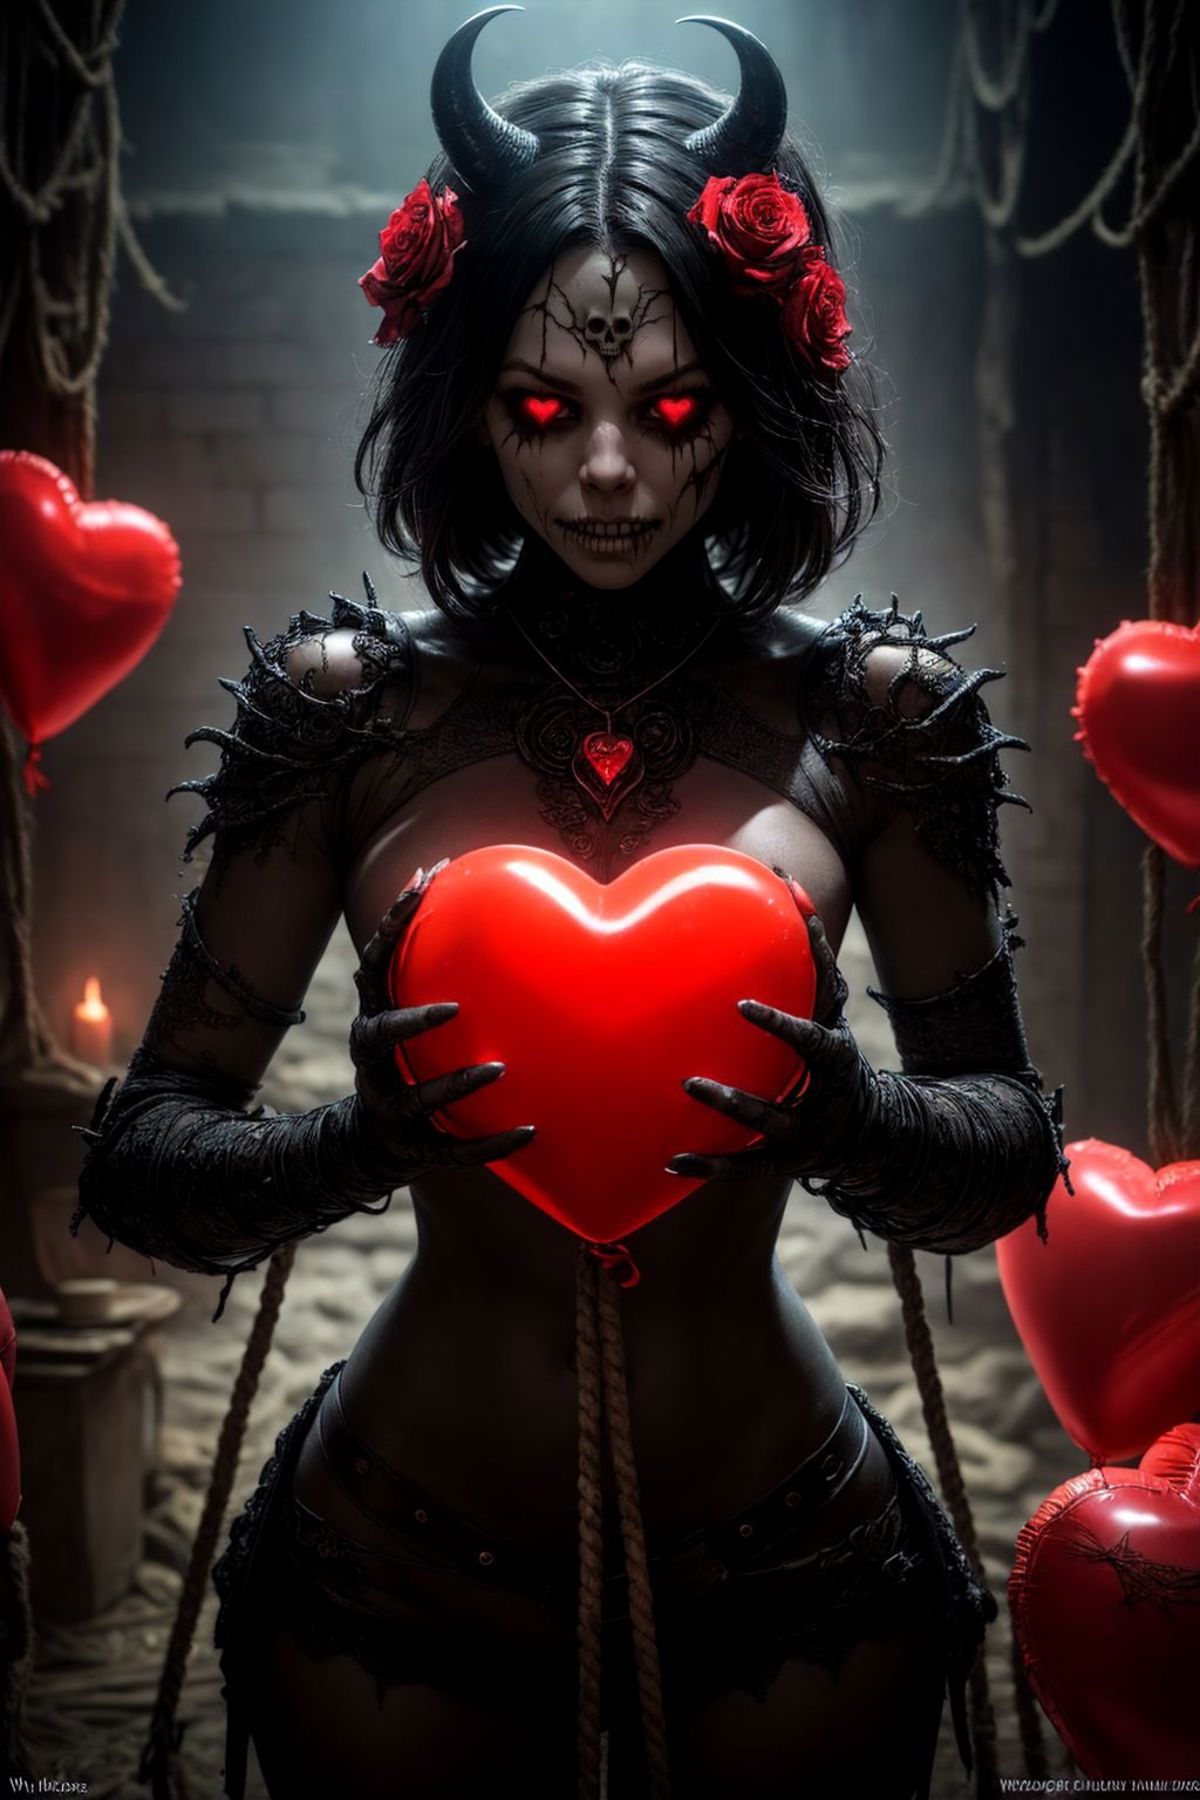 A woman in a black and white dress is holding a red heart.